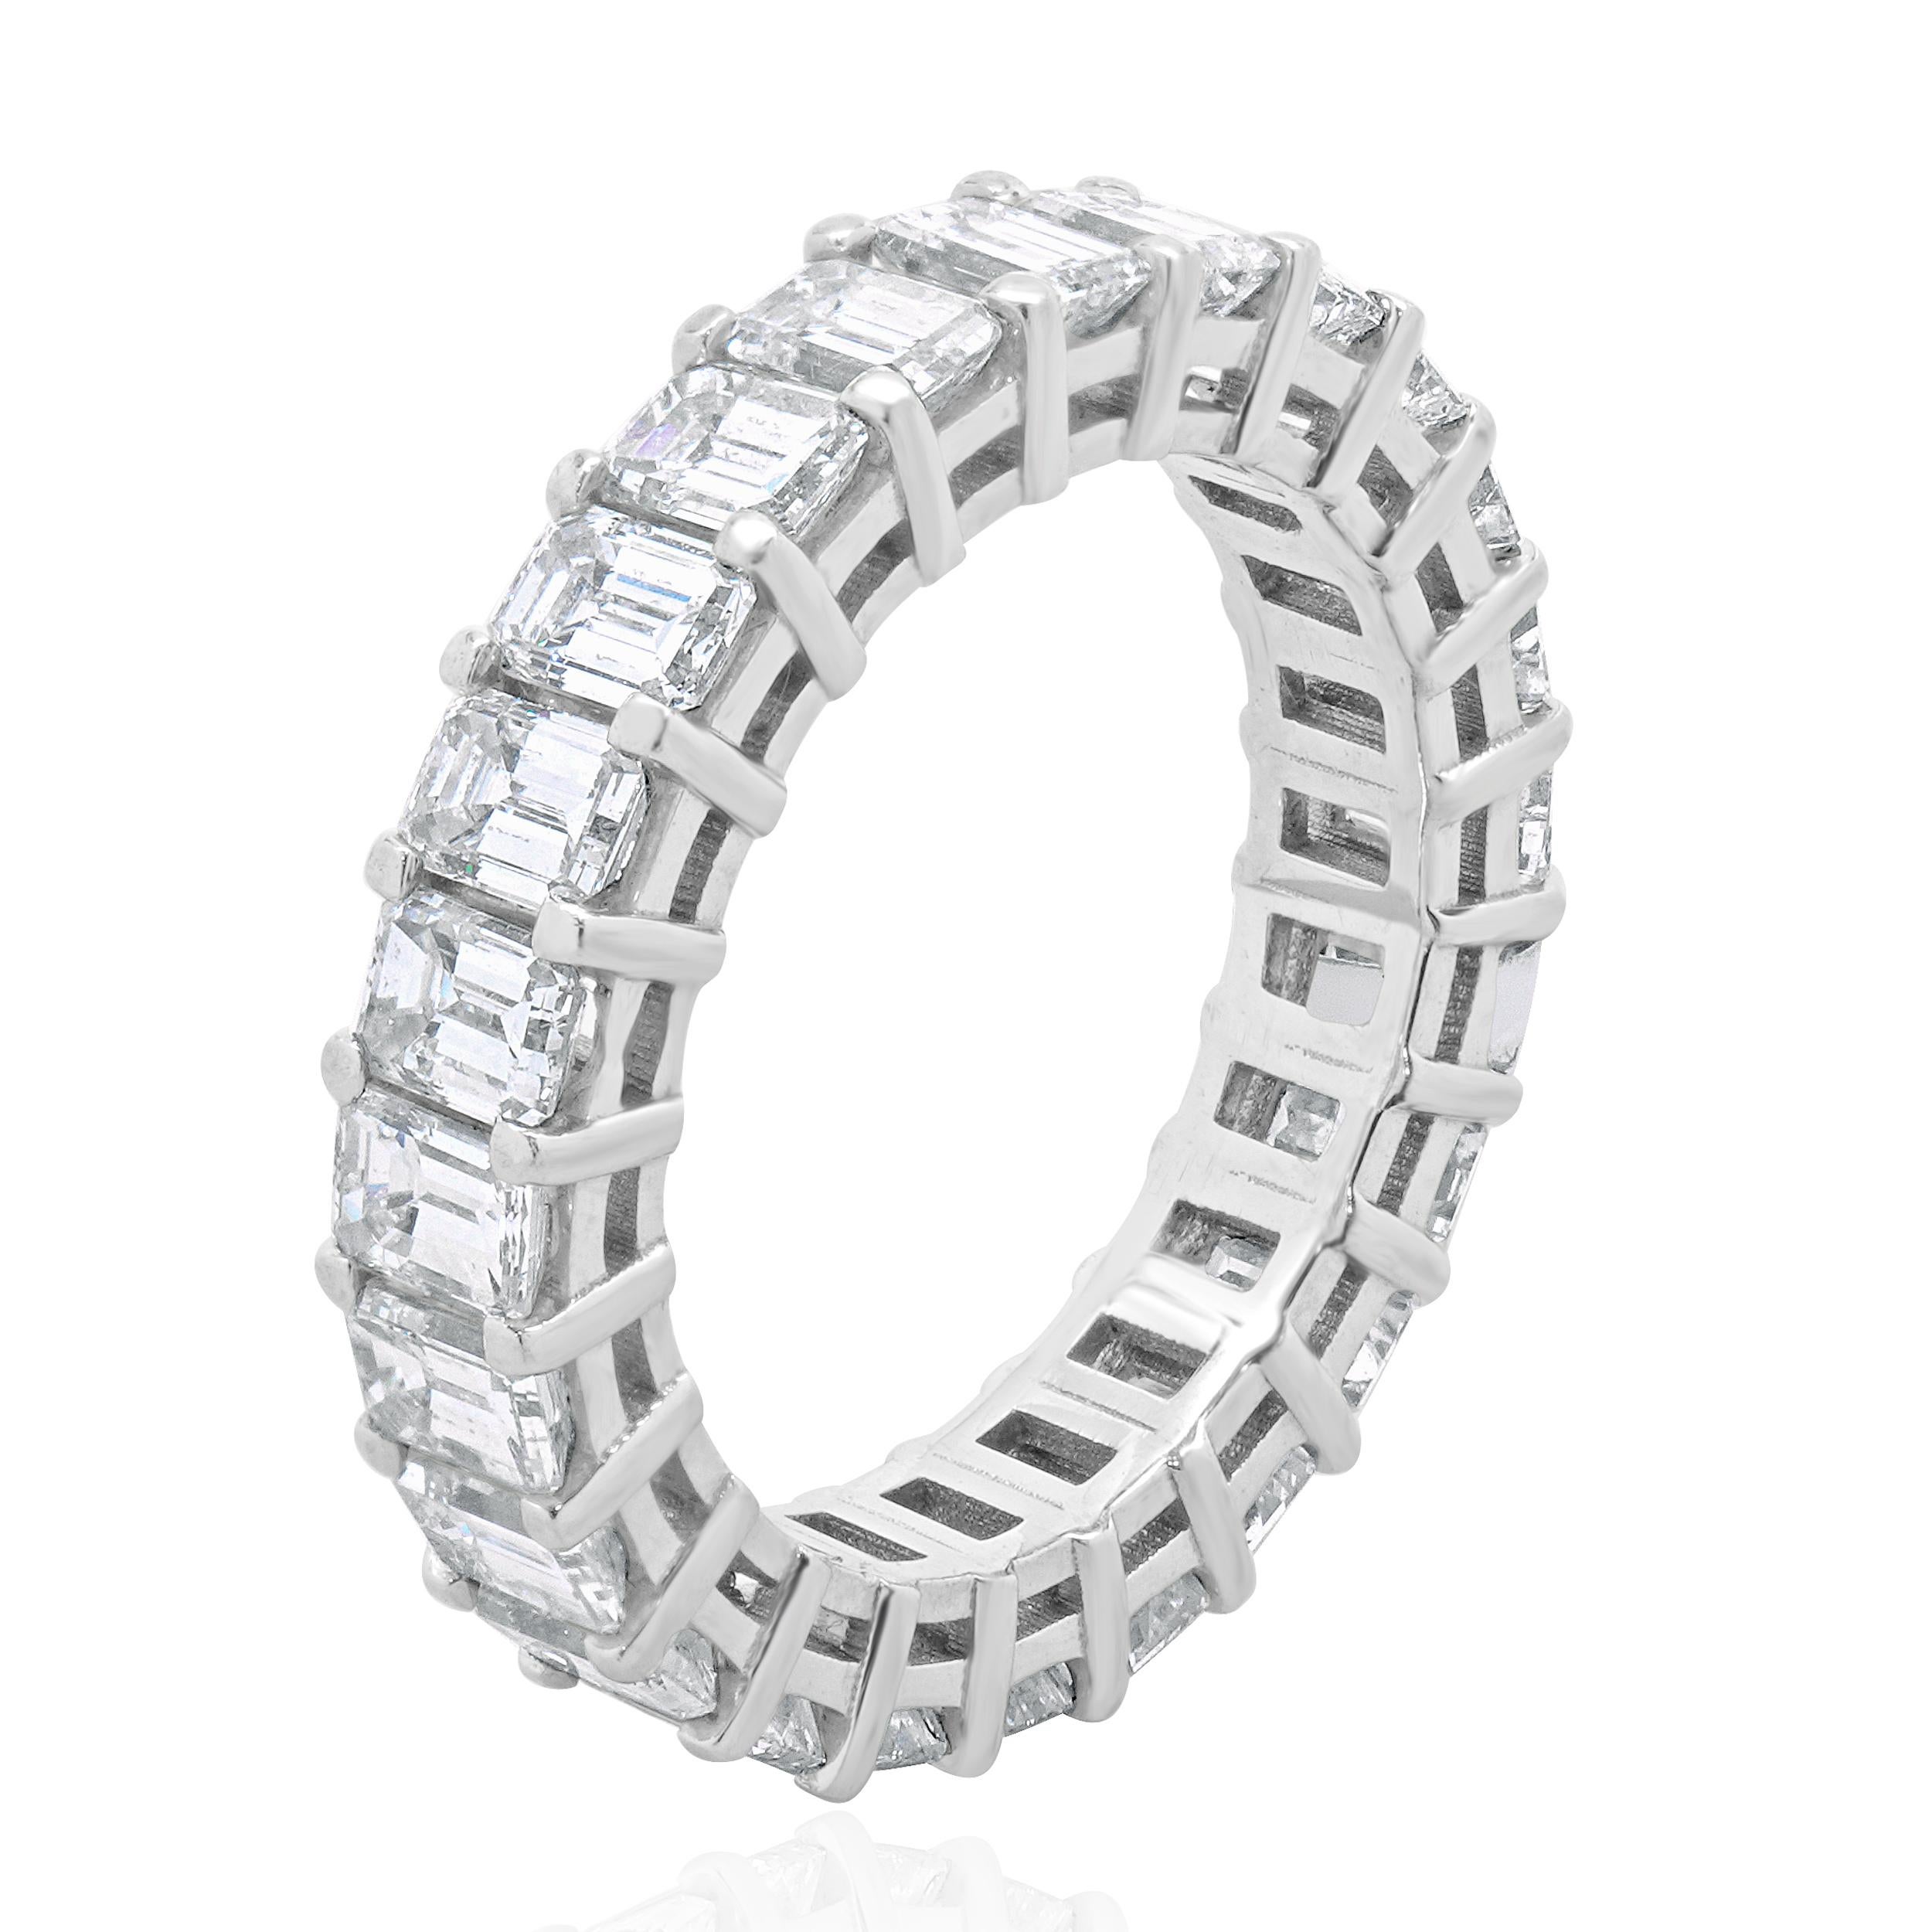 Designer: custom
Material: 14K white gold
Diamond: 24 emerald cut = 4.42cttw
Color: G
Clarity: VS-SI1
Ring size: 6.5 (please allow two additional shipping days for sizing requests)
Weight: 5.36 grams
